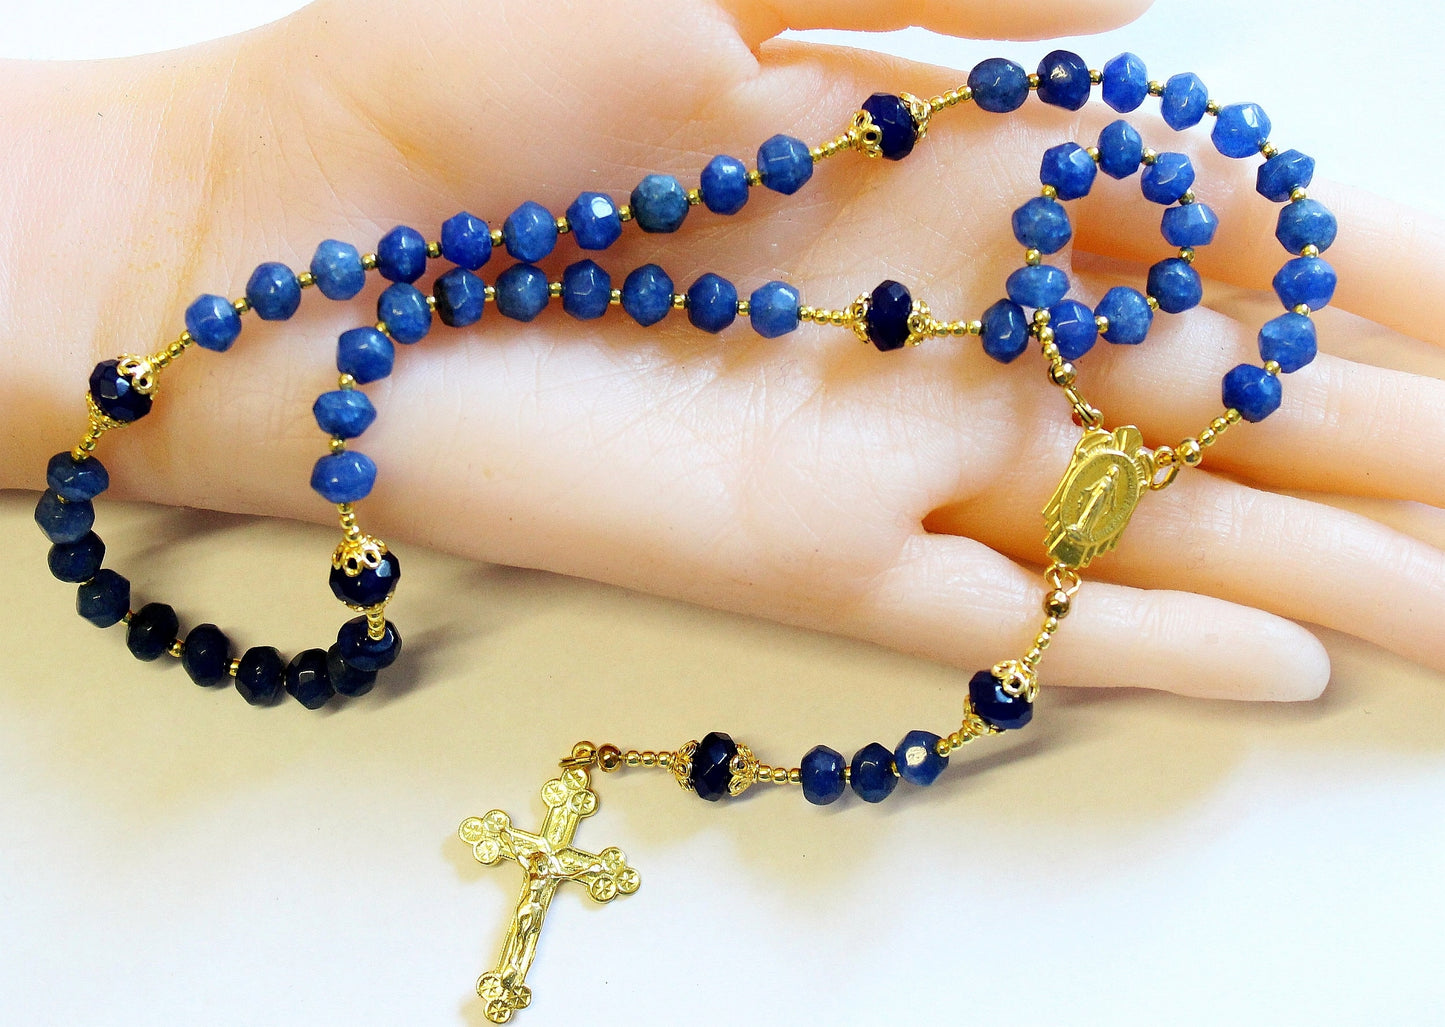 Catholic Rosary Genuine Faceted Sapphire and Vermeil